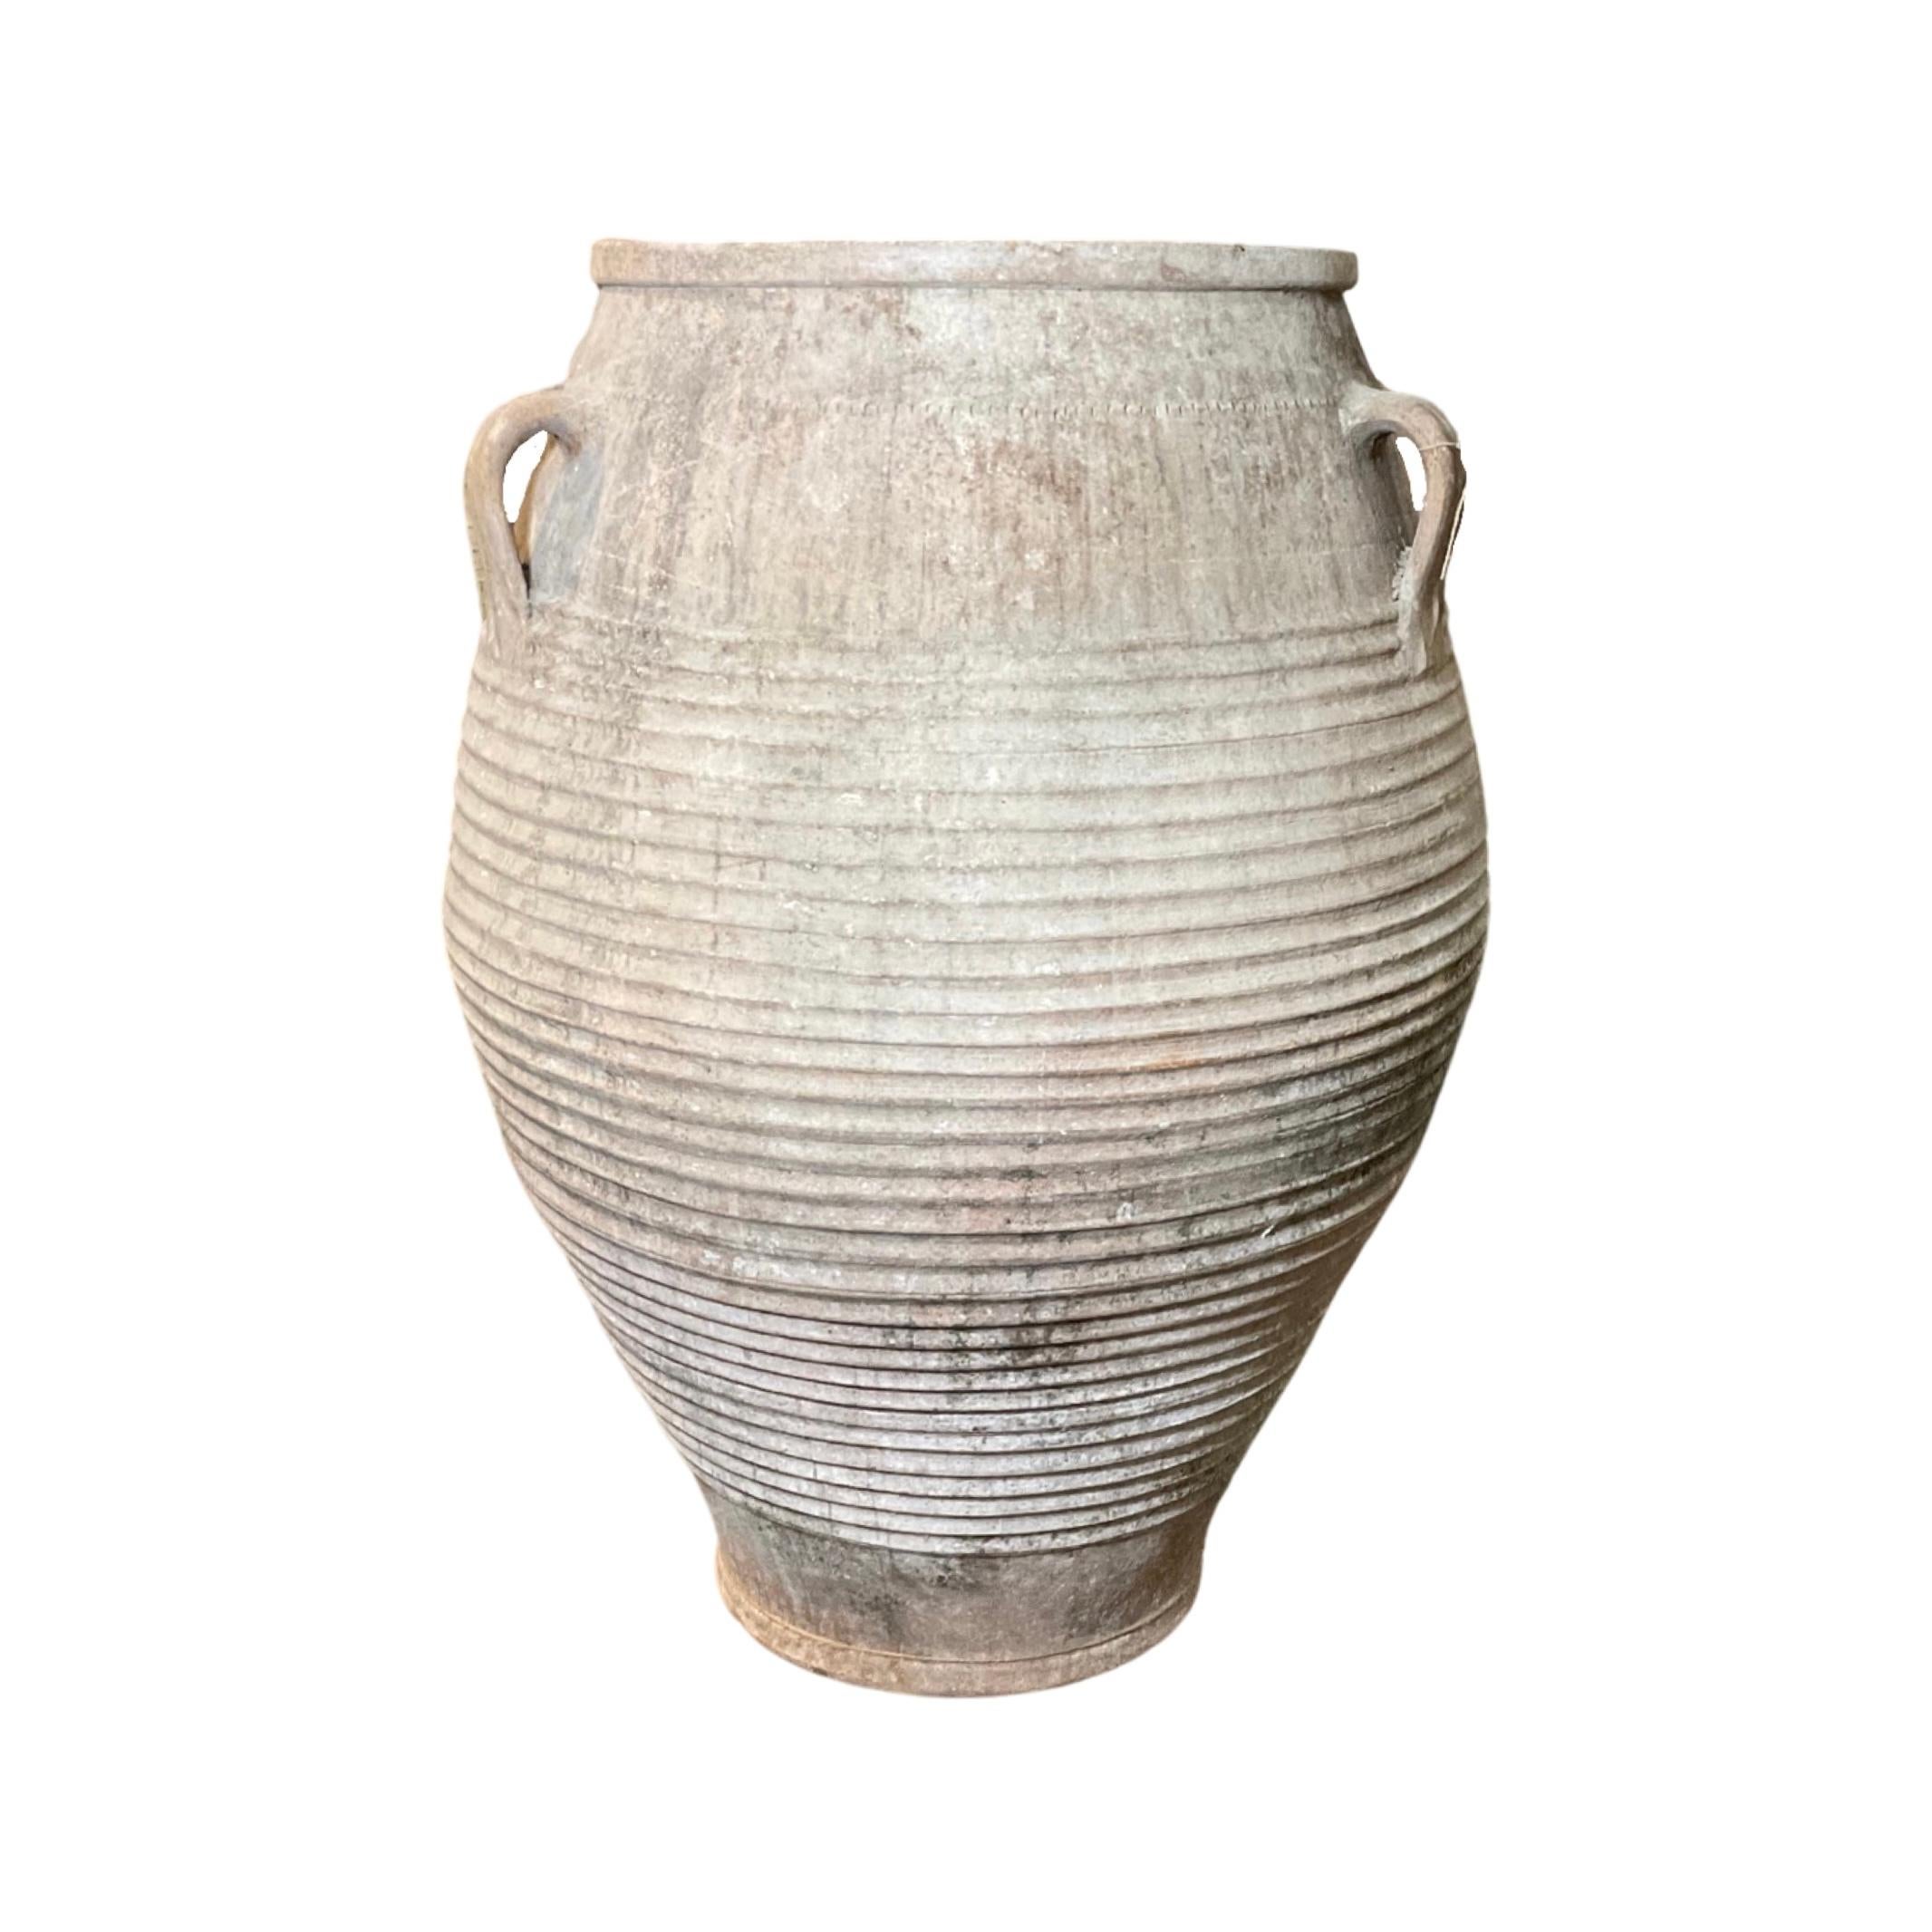 Add a classic touch to your outdoor space with this Greece Terracotta Planter. Crafted from high-fired clay, it is frost-proof, durable, and designed to last a lifetime. Its 18th century design adds timeless charm to any garden.